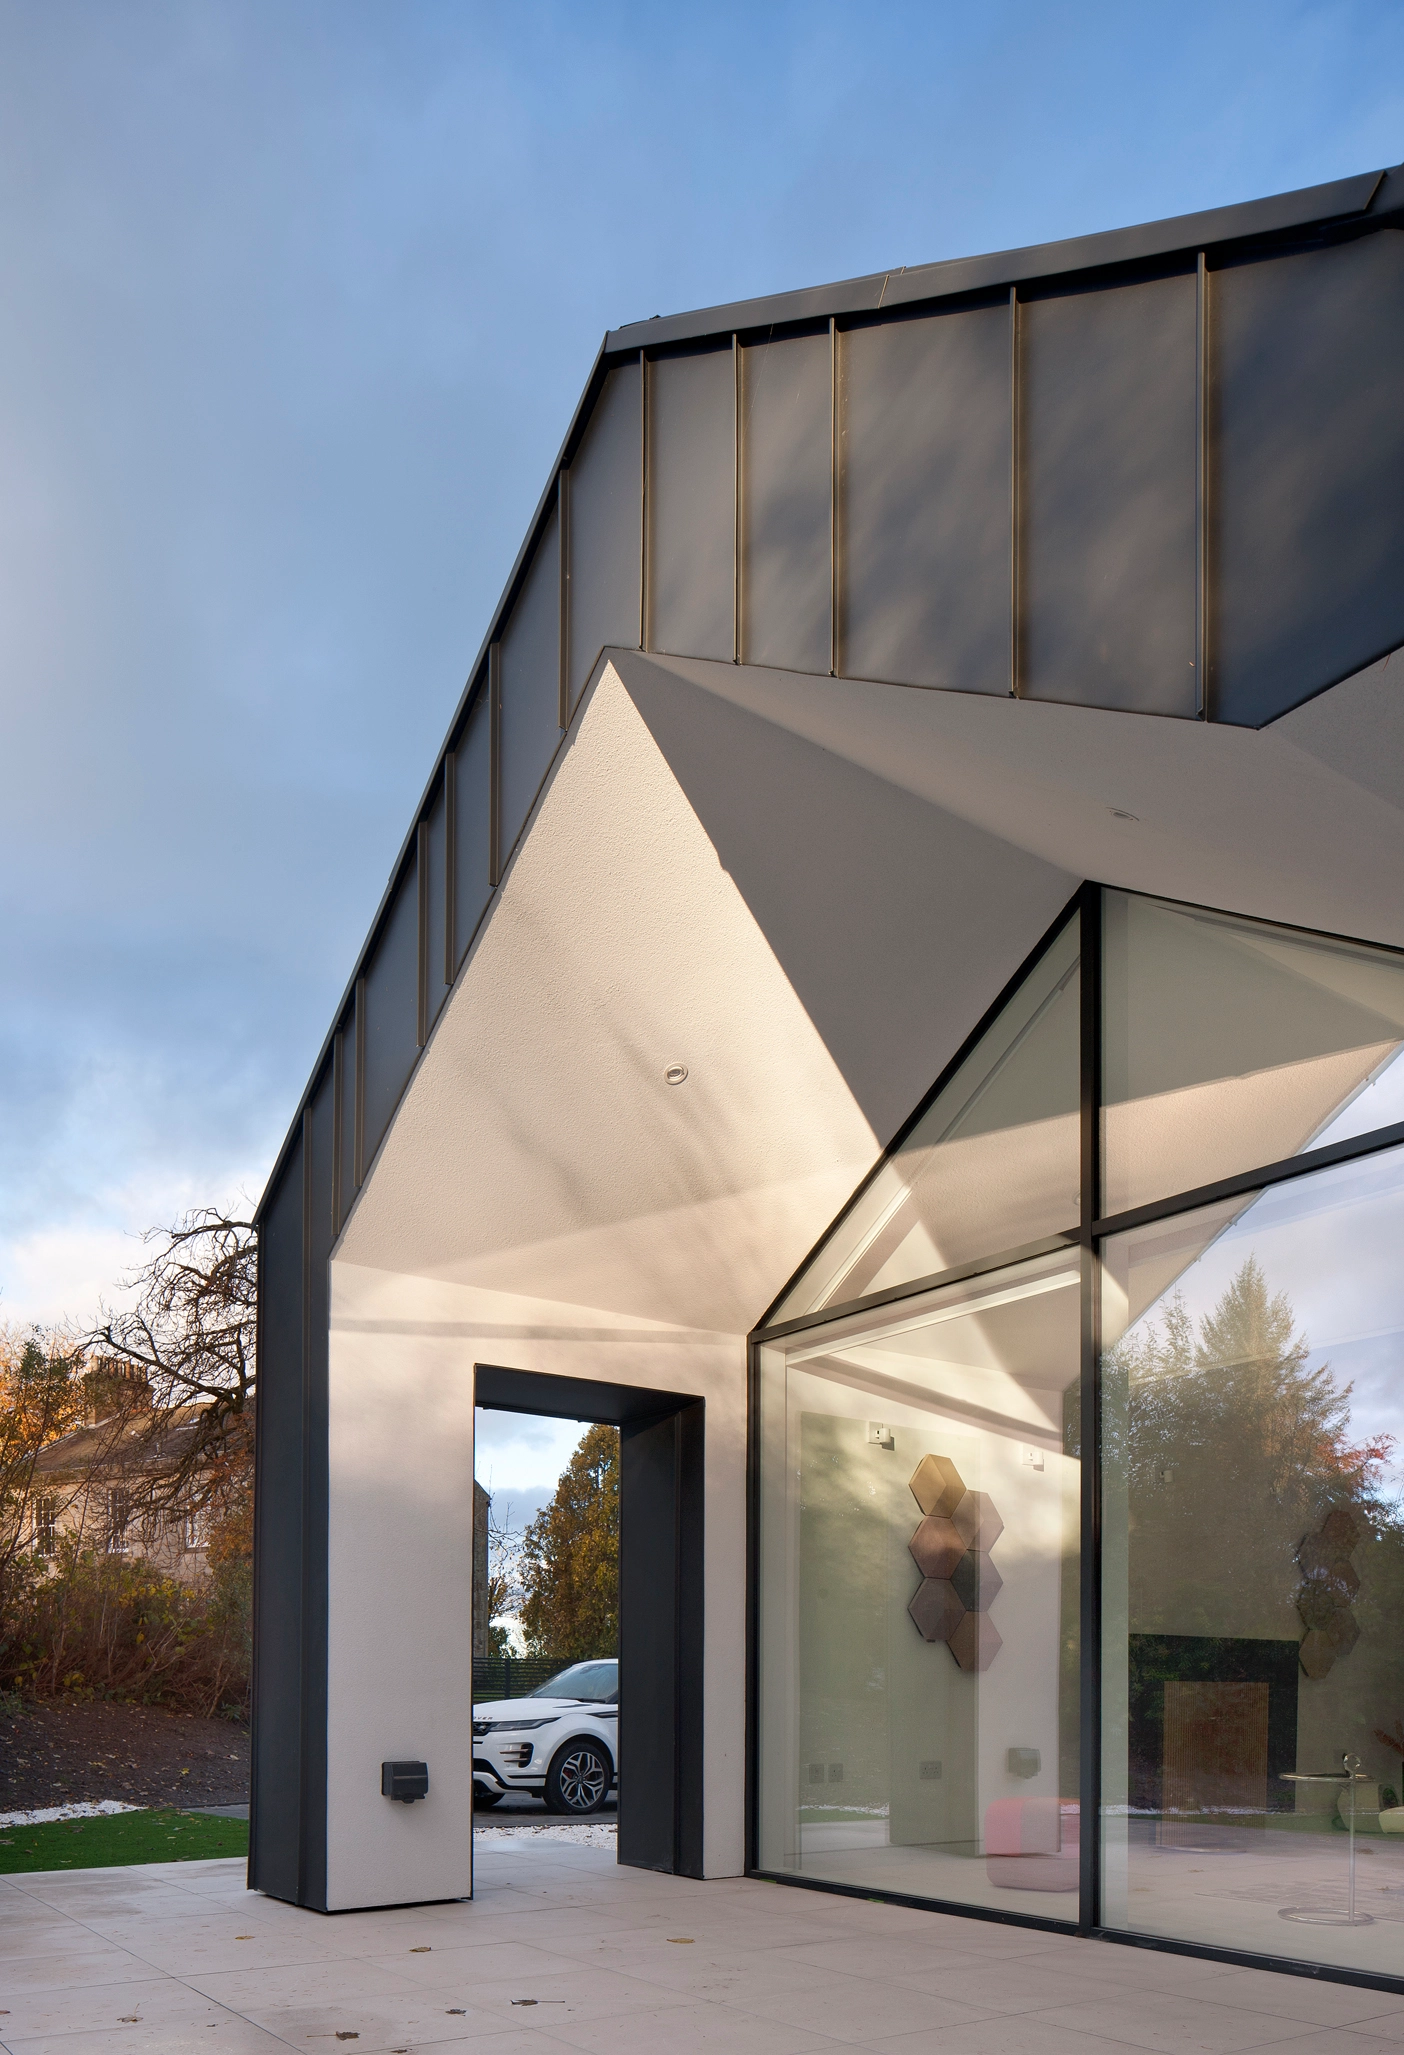 A newly renovated house in Newton Mearns Glasgow, with floor-to-ceiling windows, an open-plan-layout and a protruding veranda ceiling which shelters the space from the weather, and is cladded in charcoal black zinc with white painted insides. 